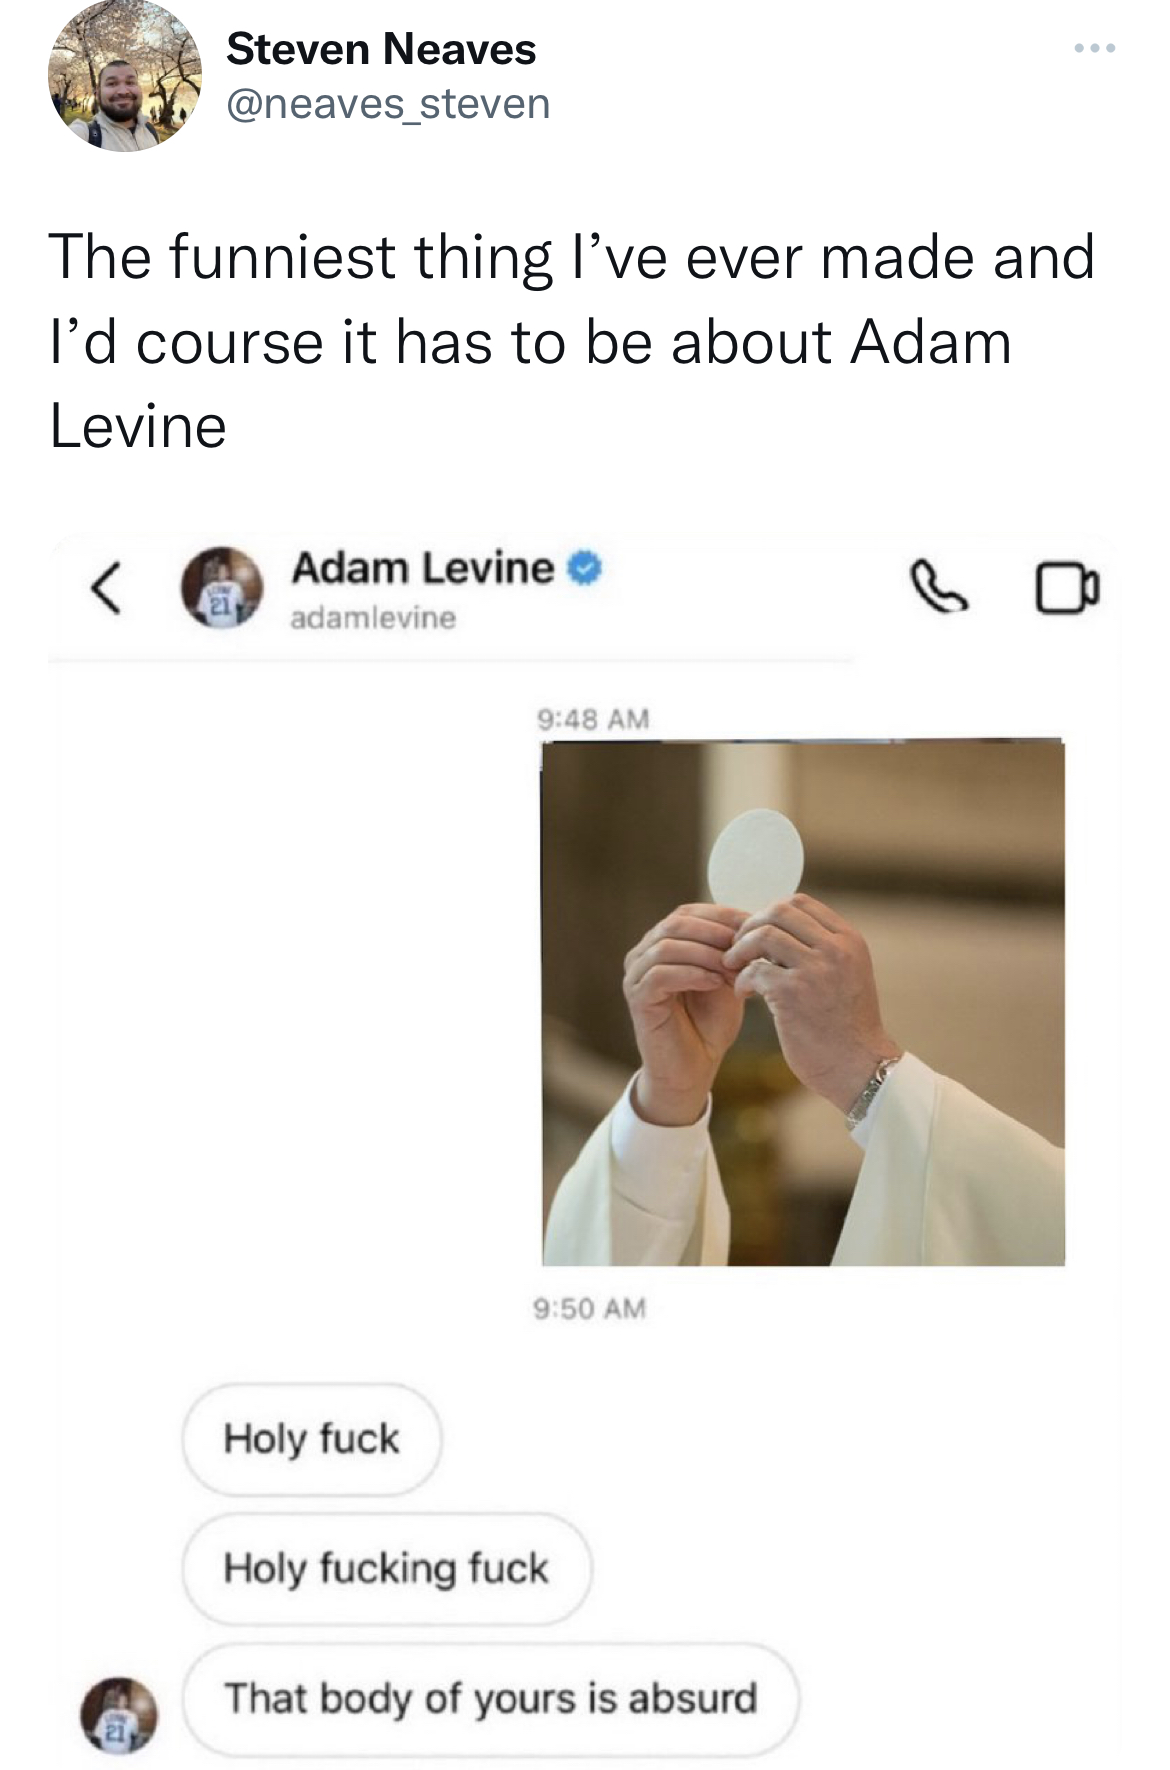 Adam Levine Sexting memes - website - Steven Neaves The funniest thing I've ever made and I'd course it has to be about Adam Levine Adam Levine adamlevine Holy fuck Holy fucking fuck That body of yours is absurd